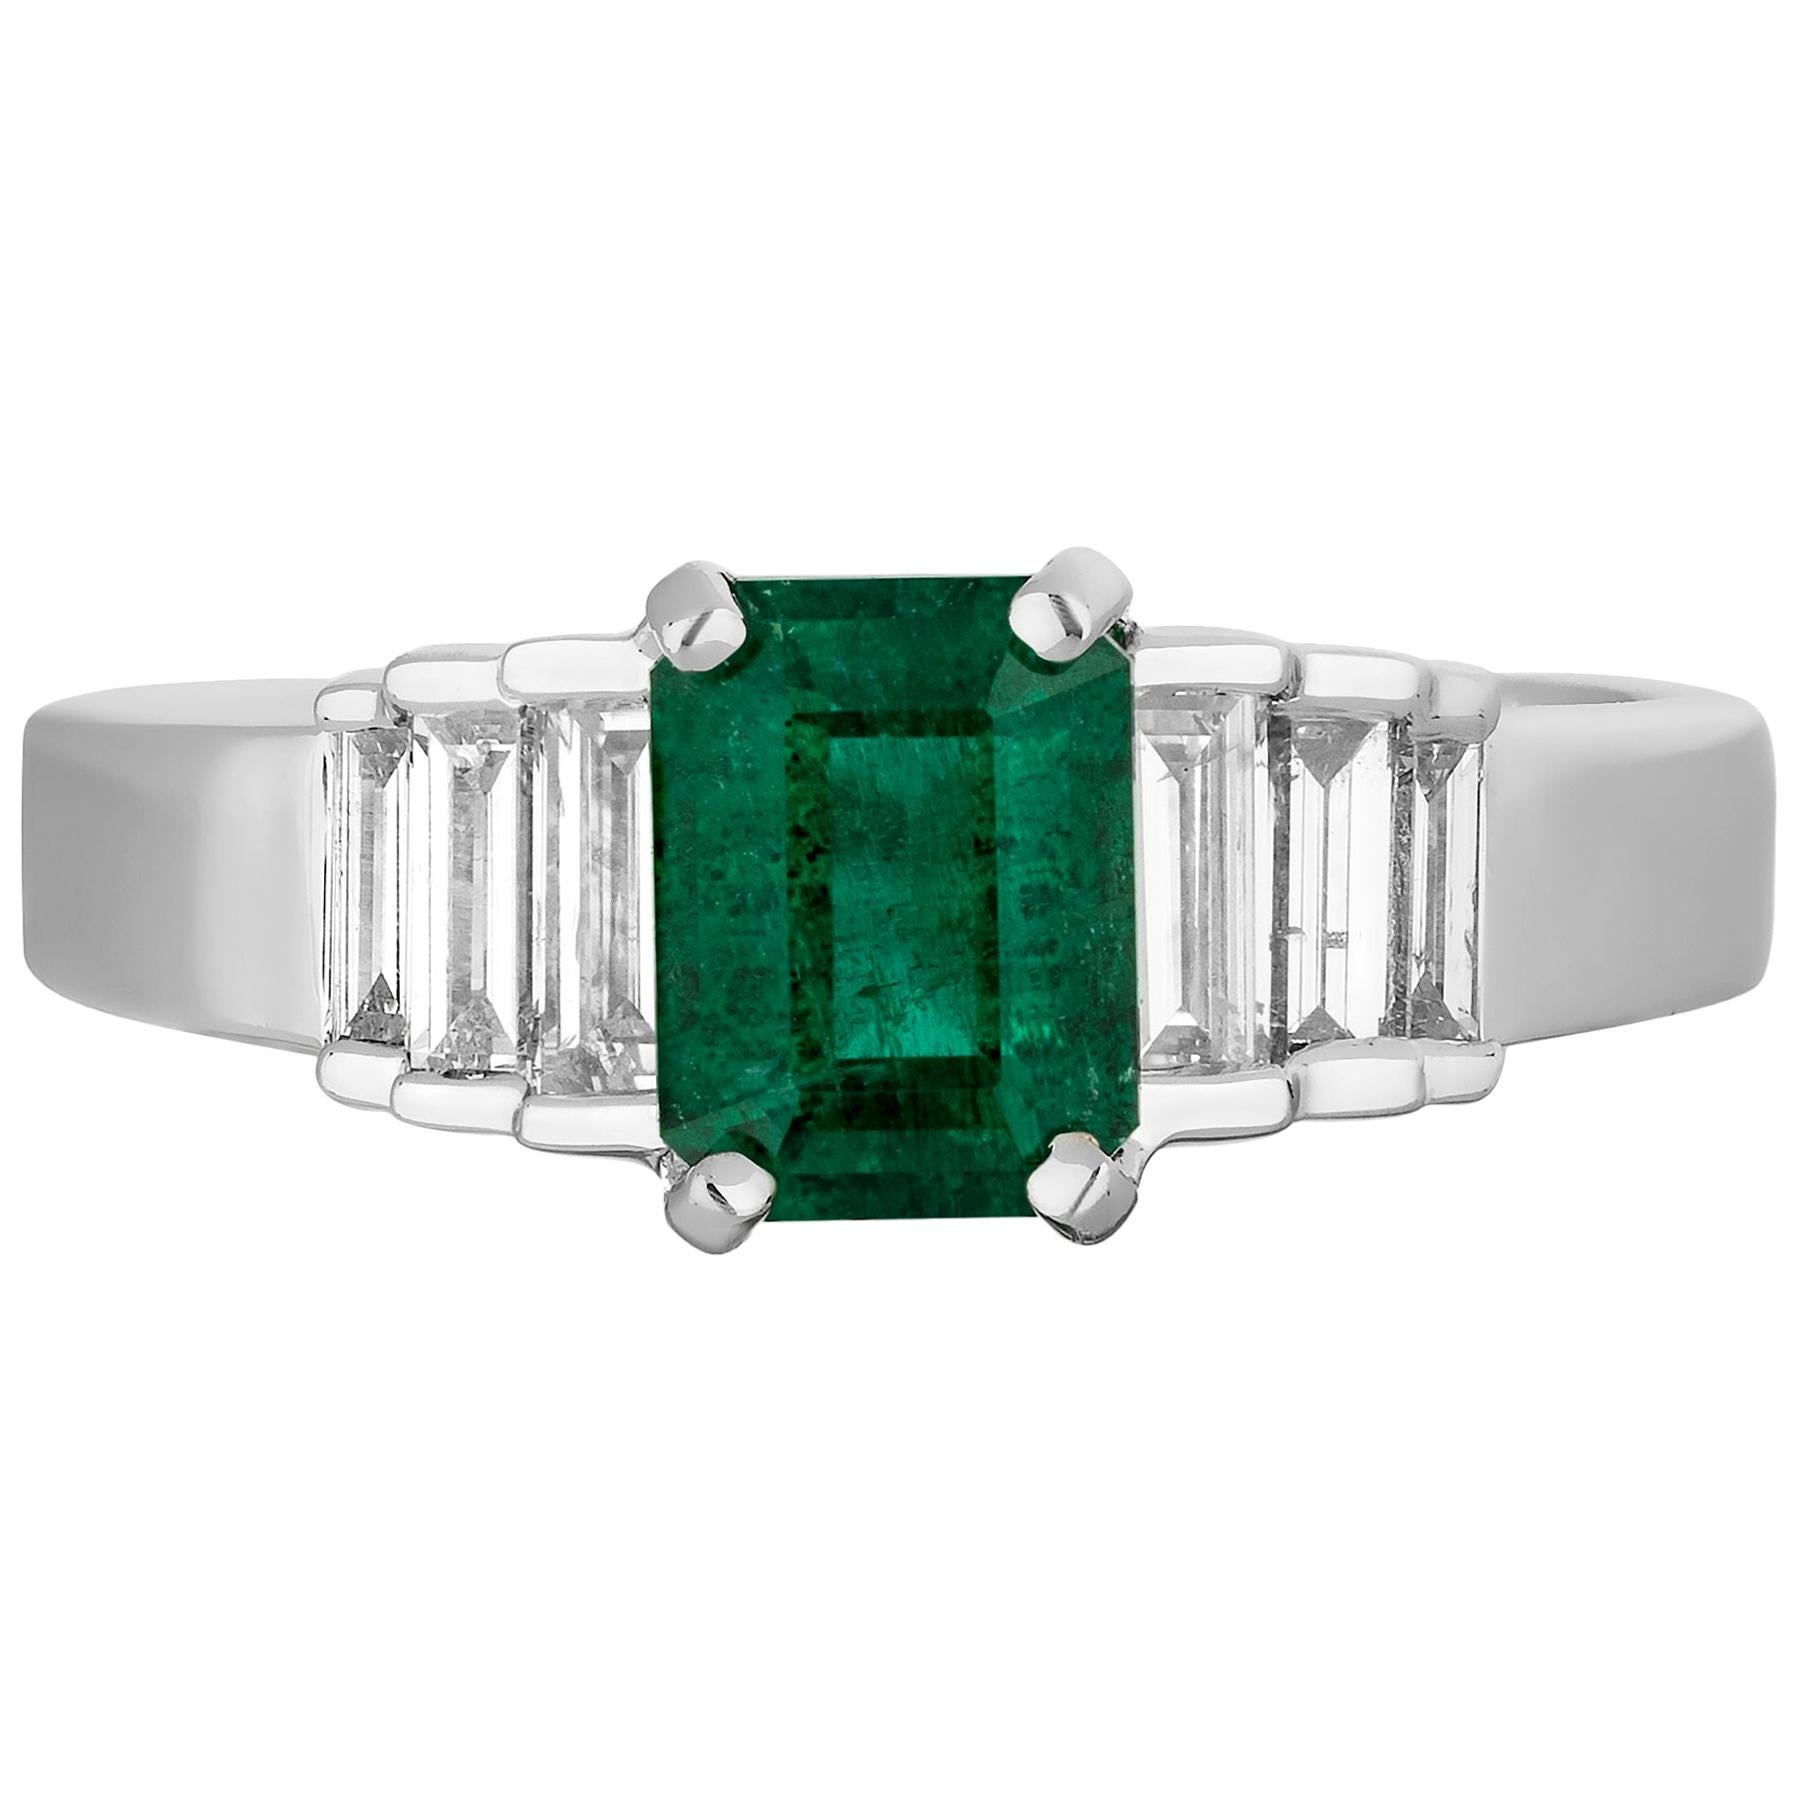 1.04 Carat Emerald Diamond Cocktail Ring For Sale